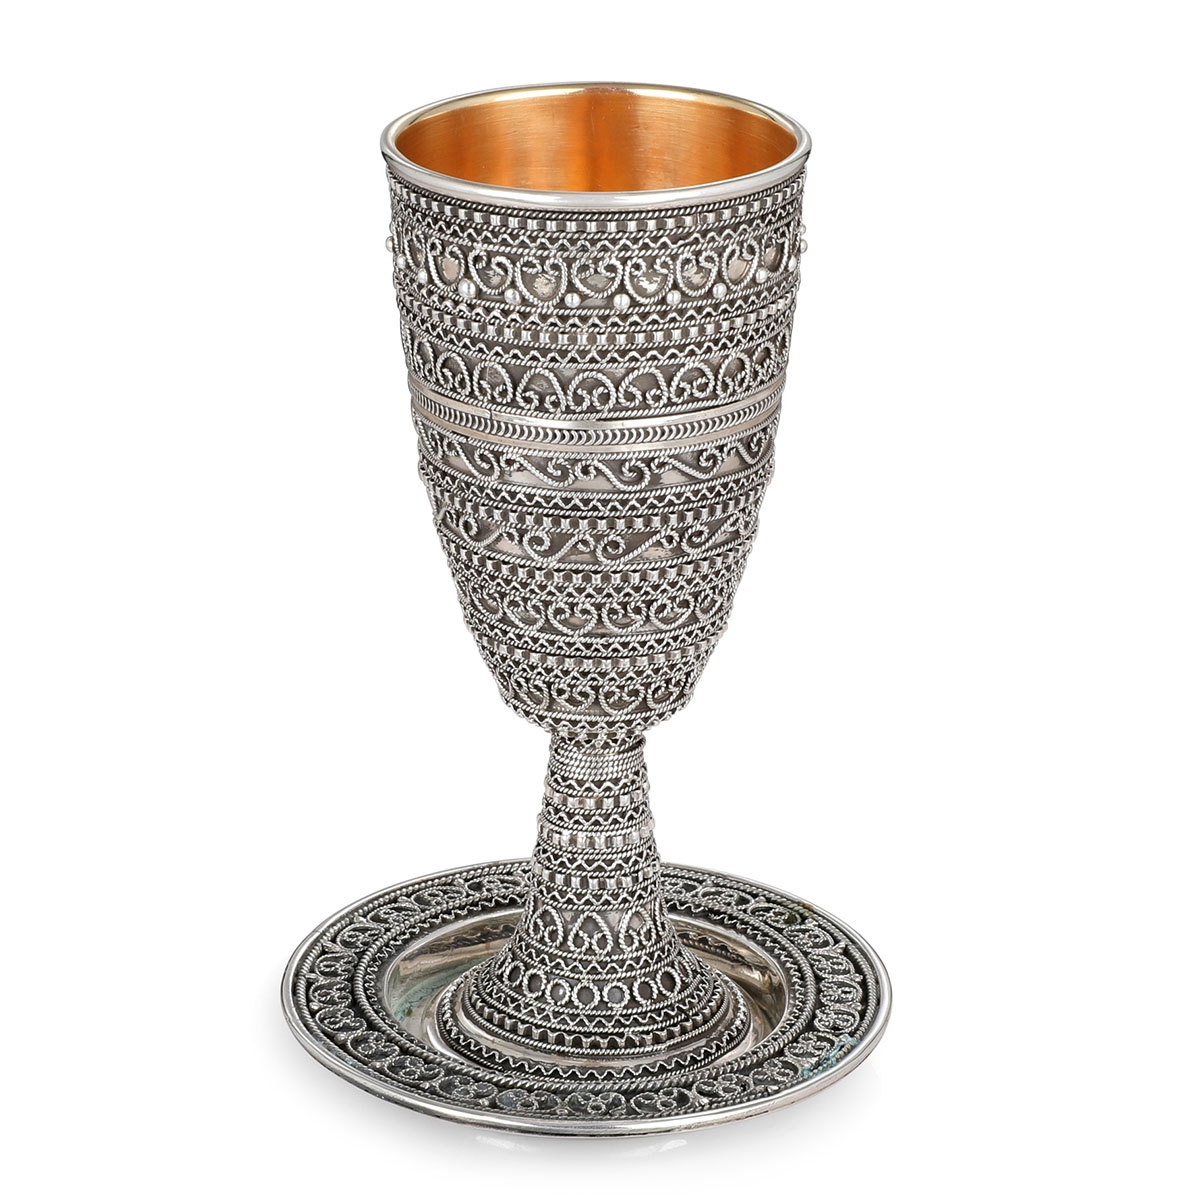 Handcrafted Sterling Silver Kiddush Cup With Filigree Design - 1